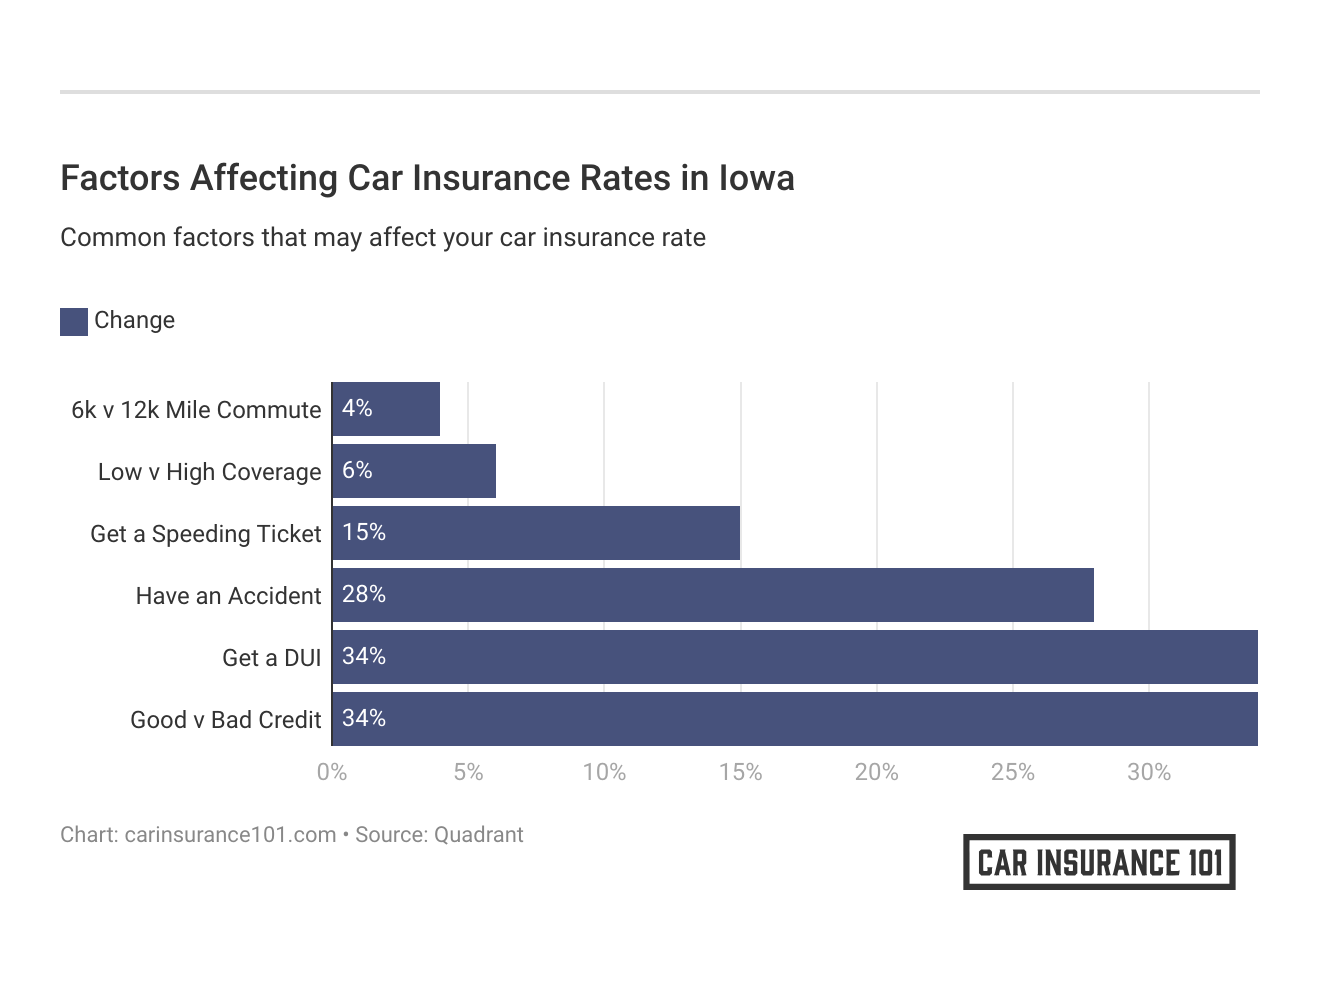 <h3>Factors Affecting Car Insurance Rates in Iowa</h3>